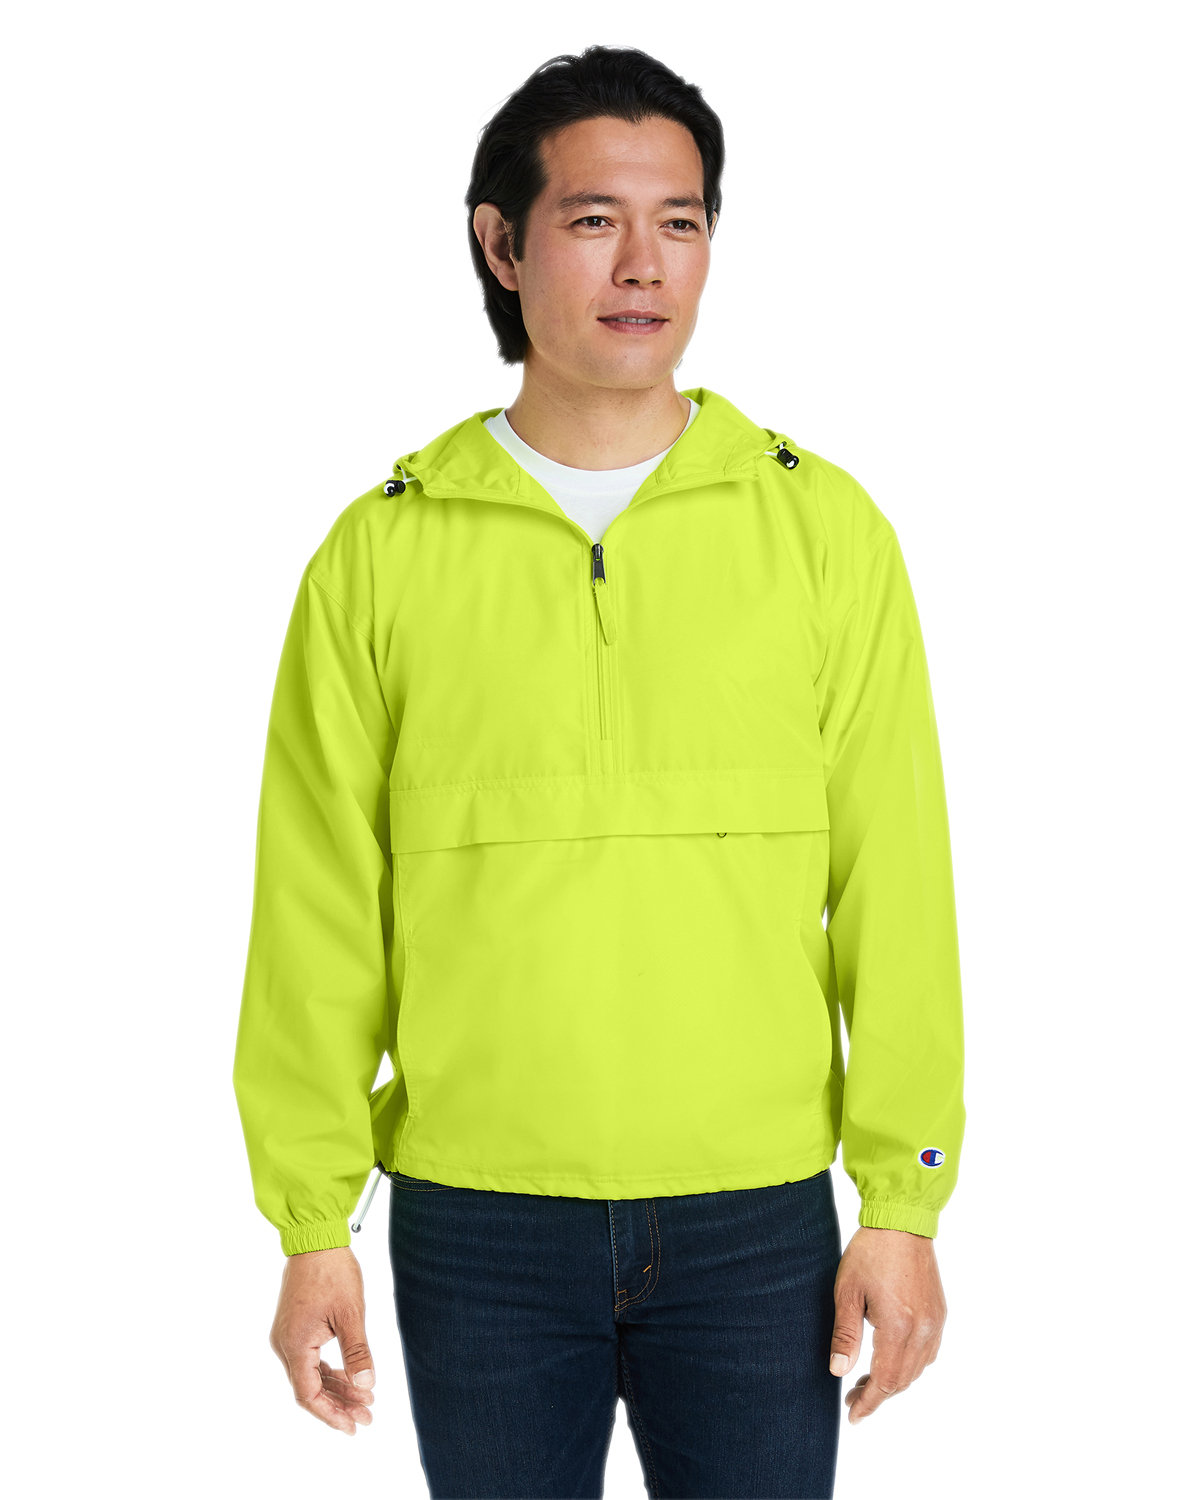 Champion Adult Packable Anorak 1/4 Zip Jacket safety green 